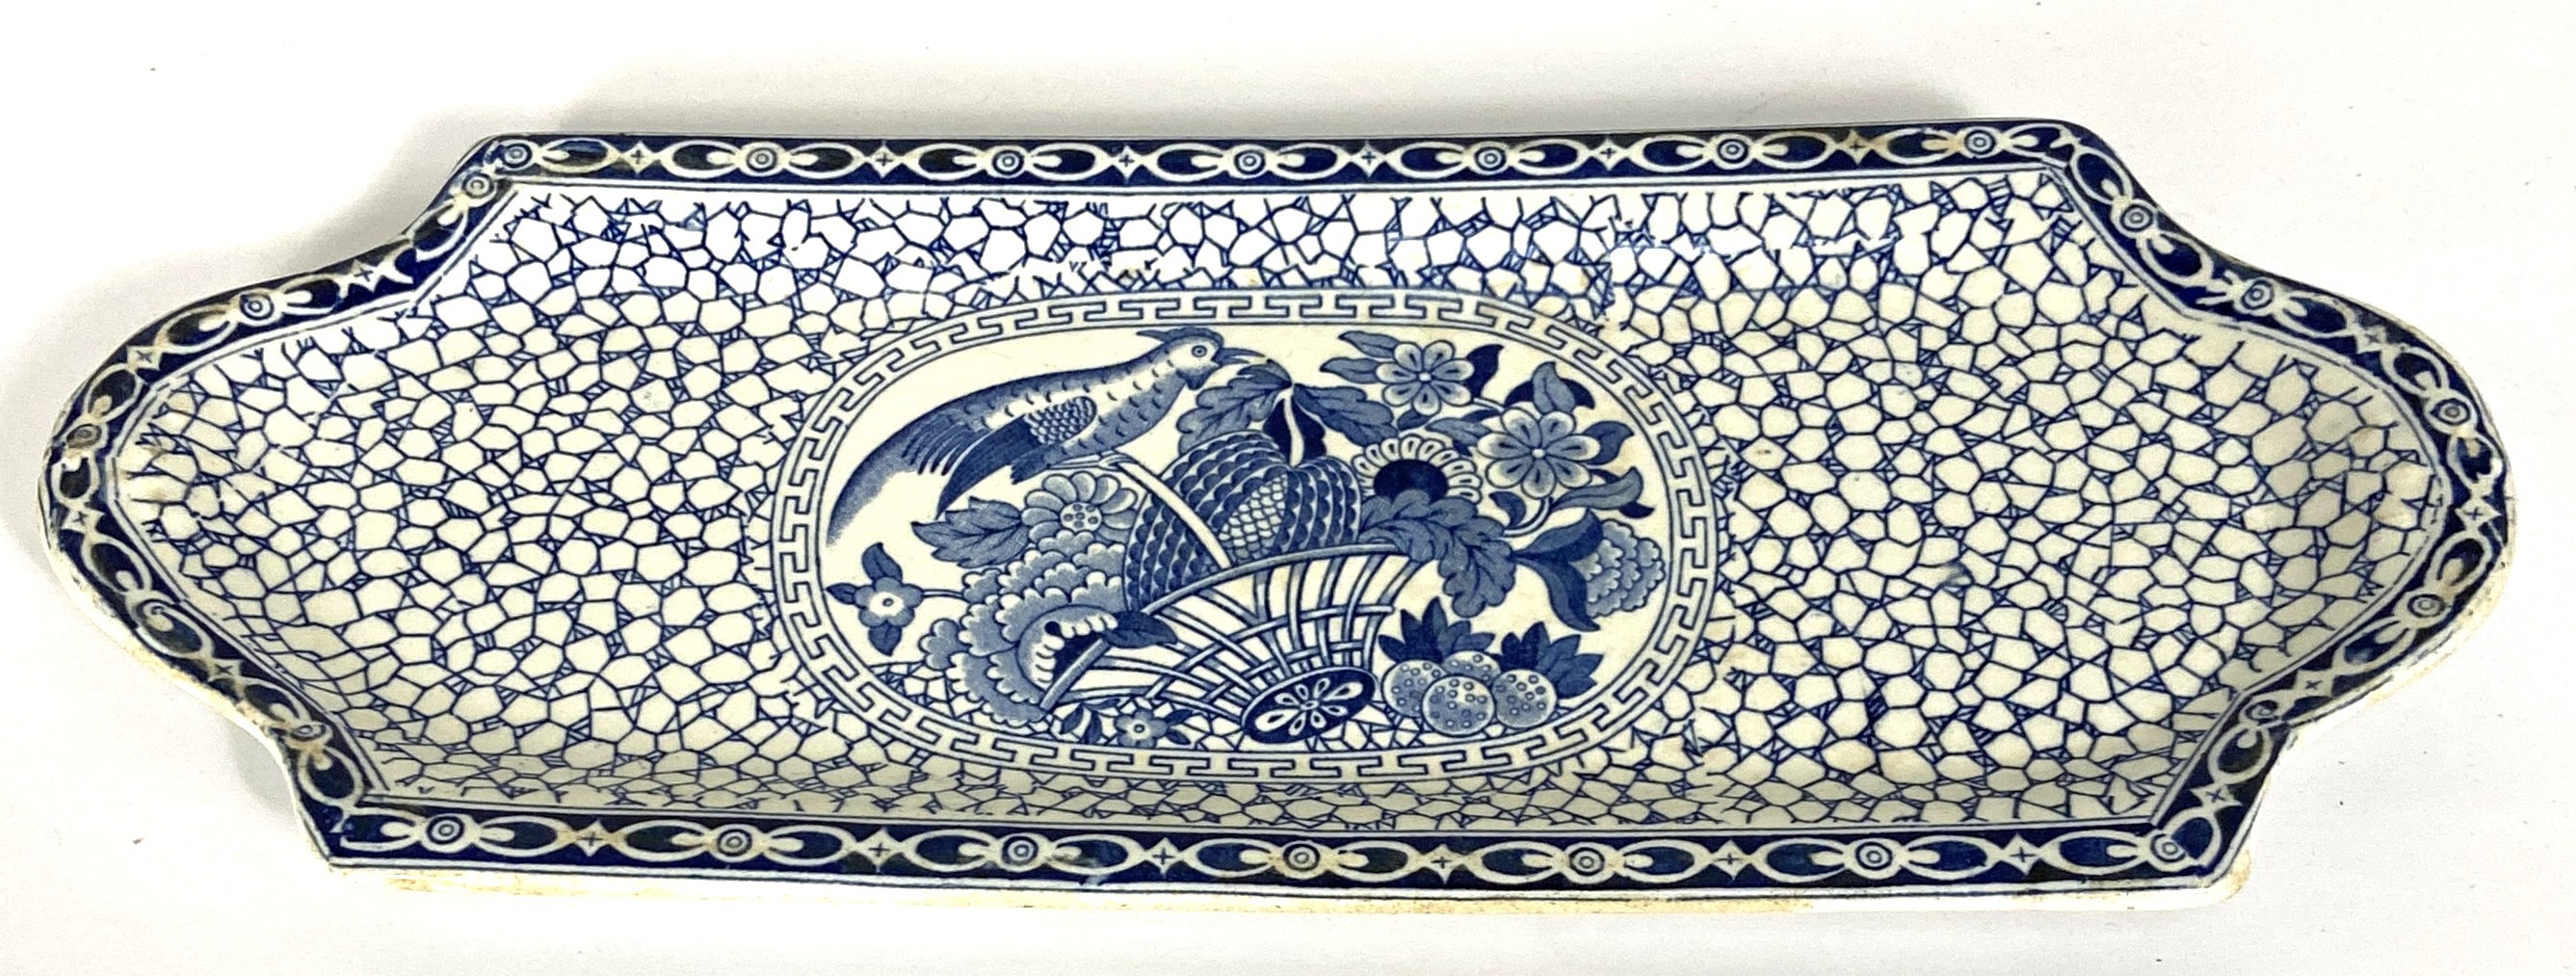 A selection of Adams Chinese pattern wares, including various platters, moon shaped salad dishes, - Image 7 of 10